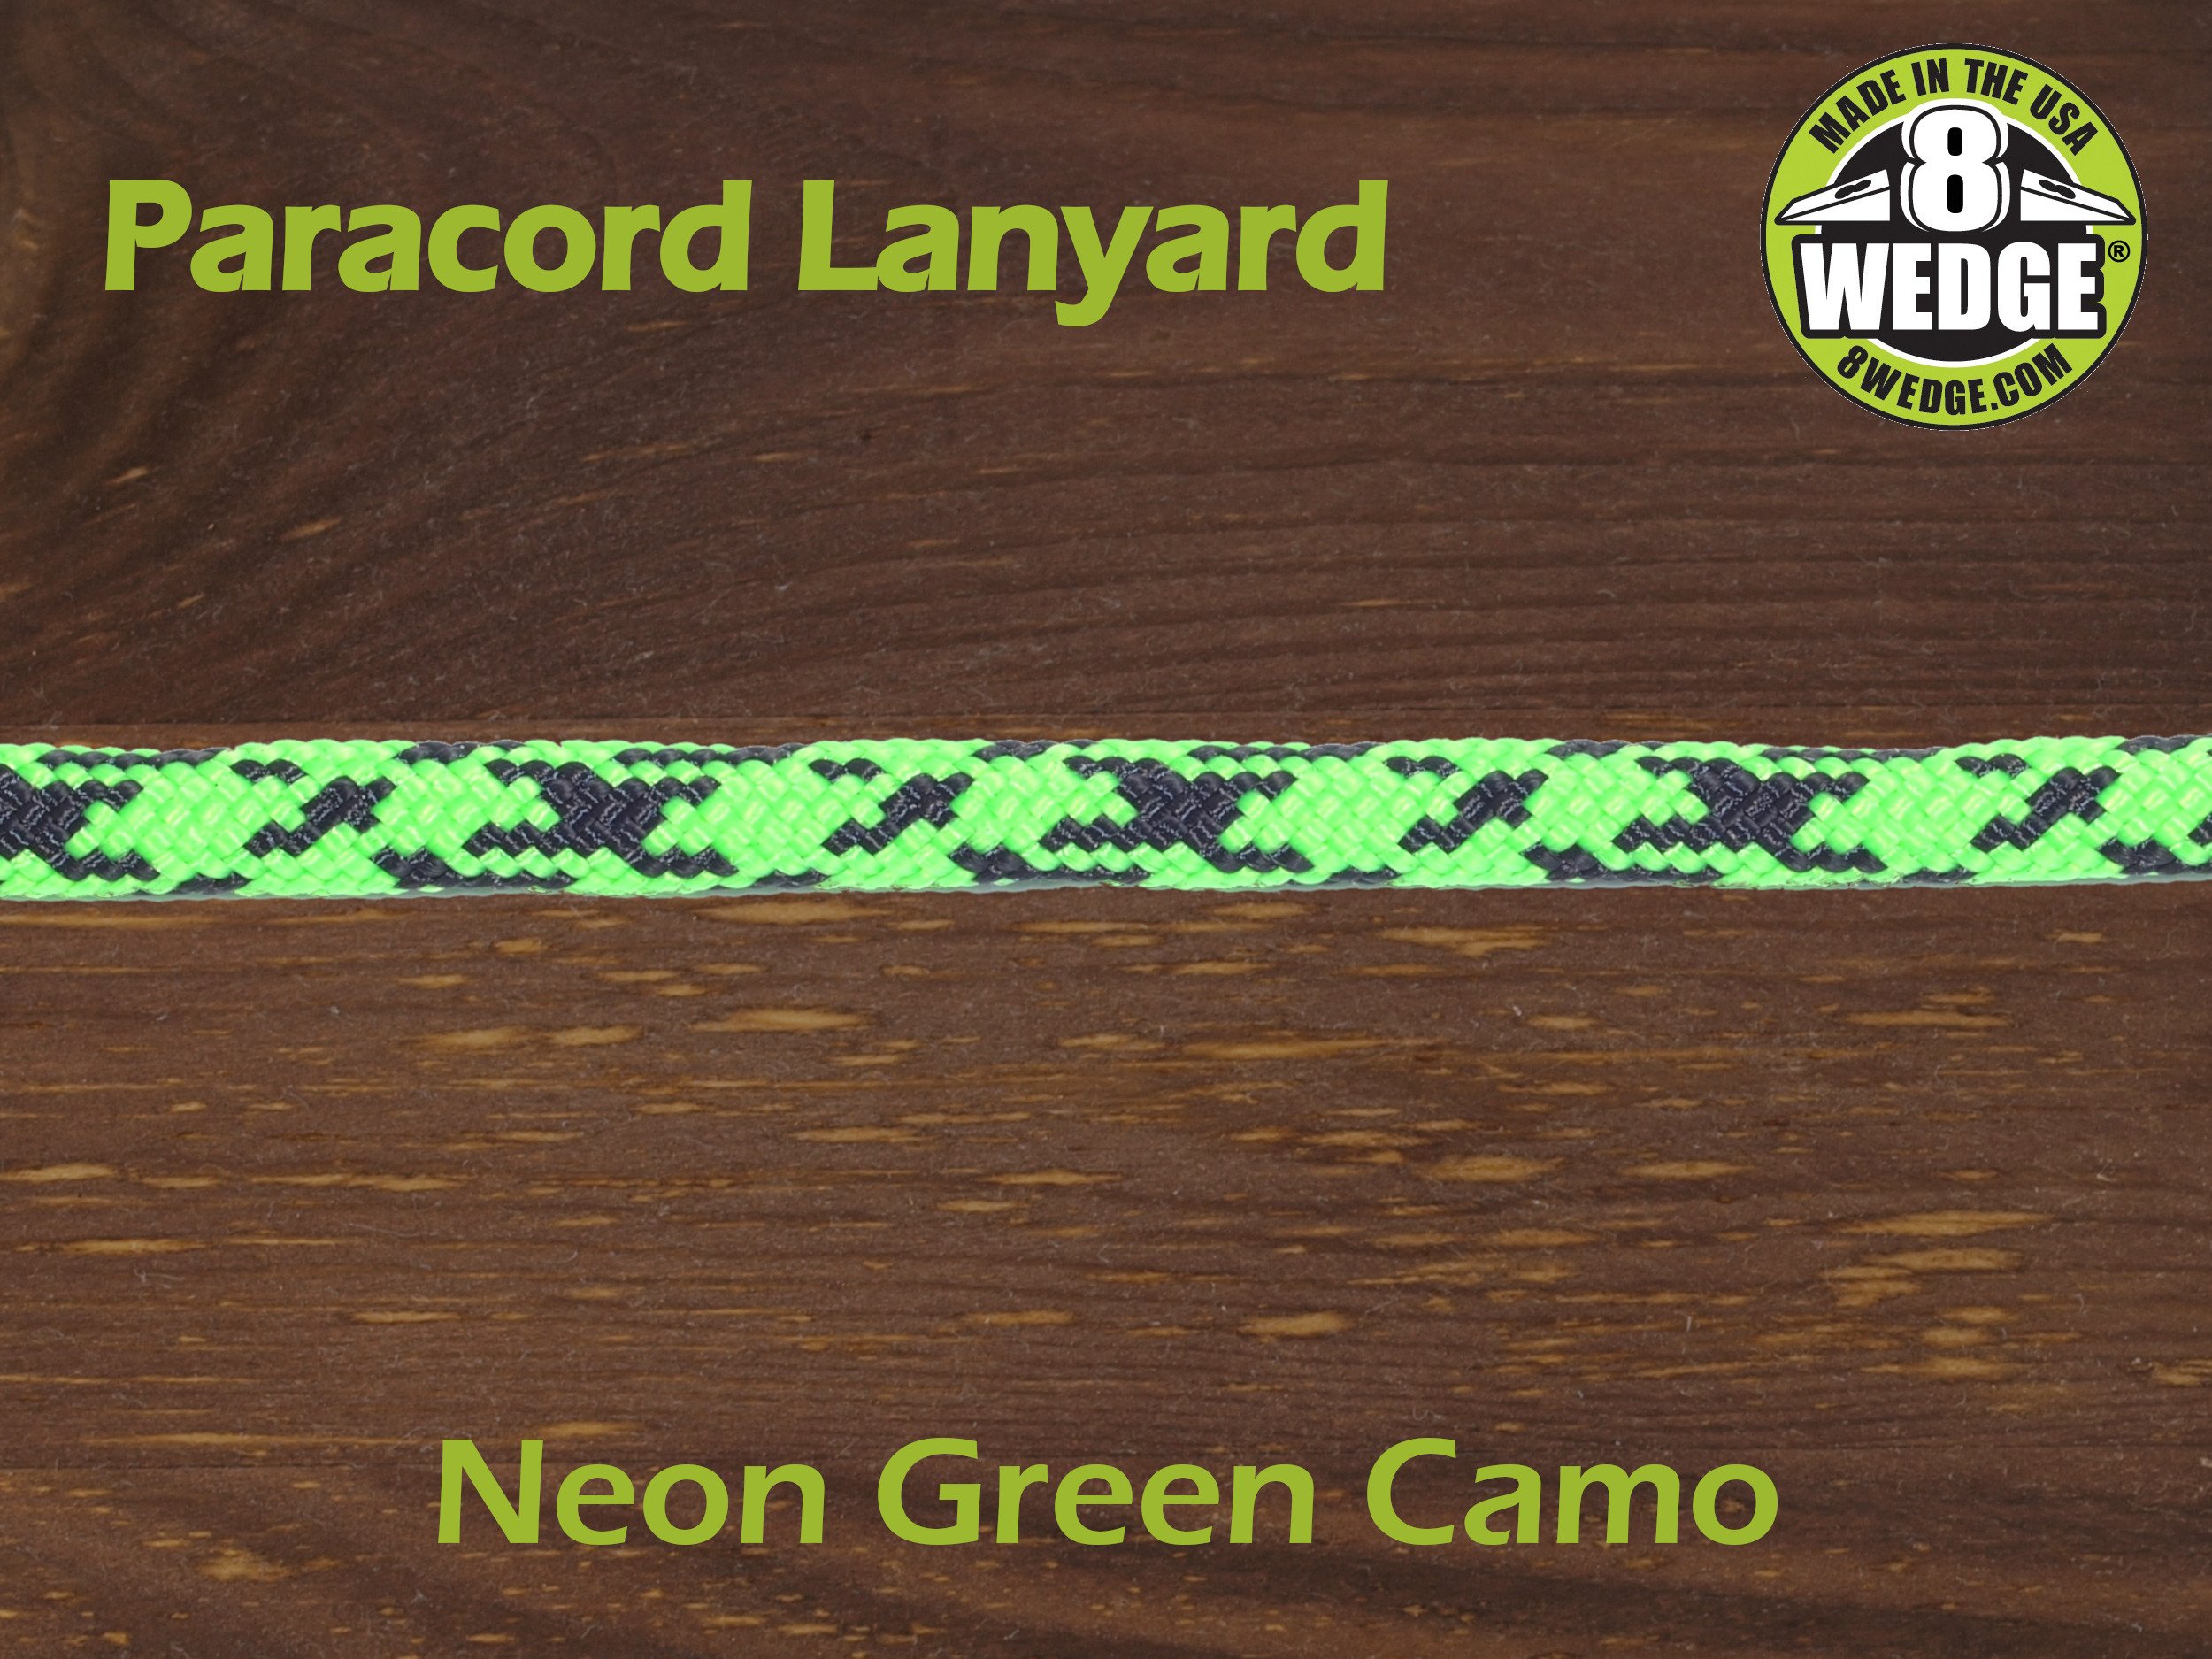 Paracord Lanyard for 8 WEDGE, Gas Tags & More! — R.J. Machine